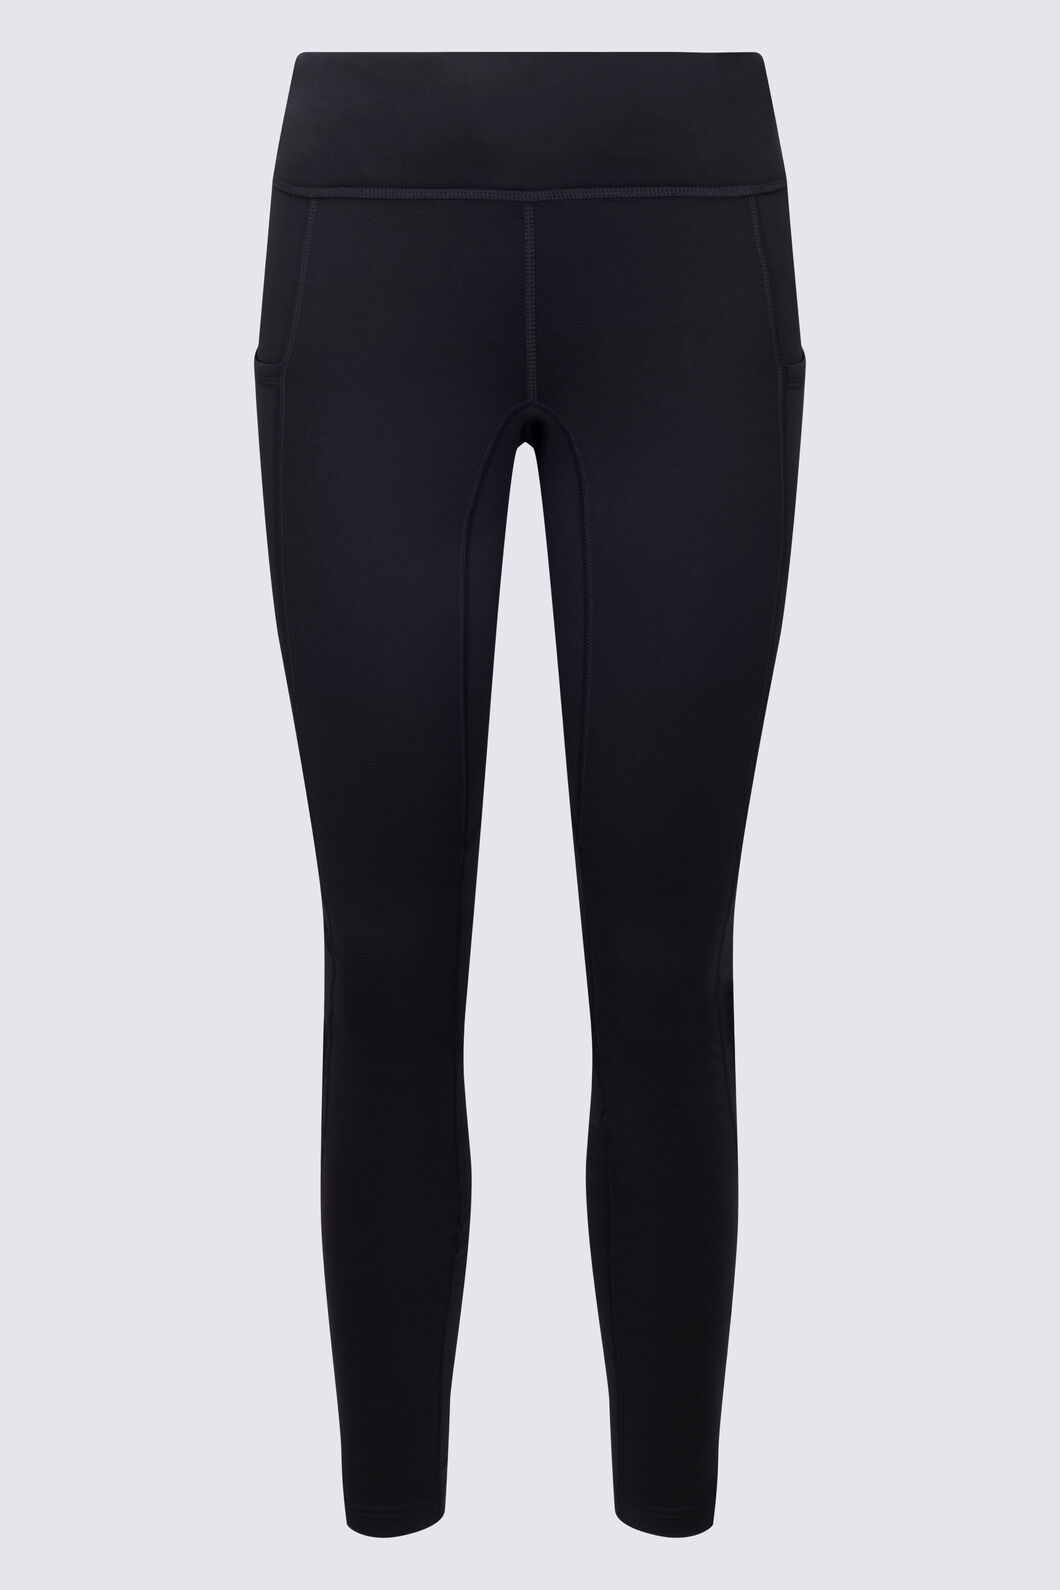 37 Best Black Leggings Of 2022 According To The Reviews